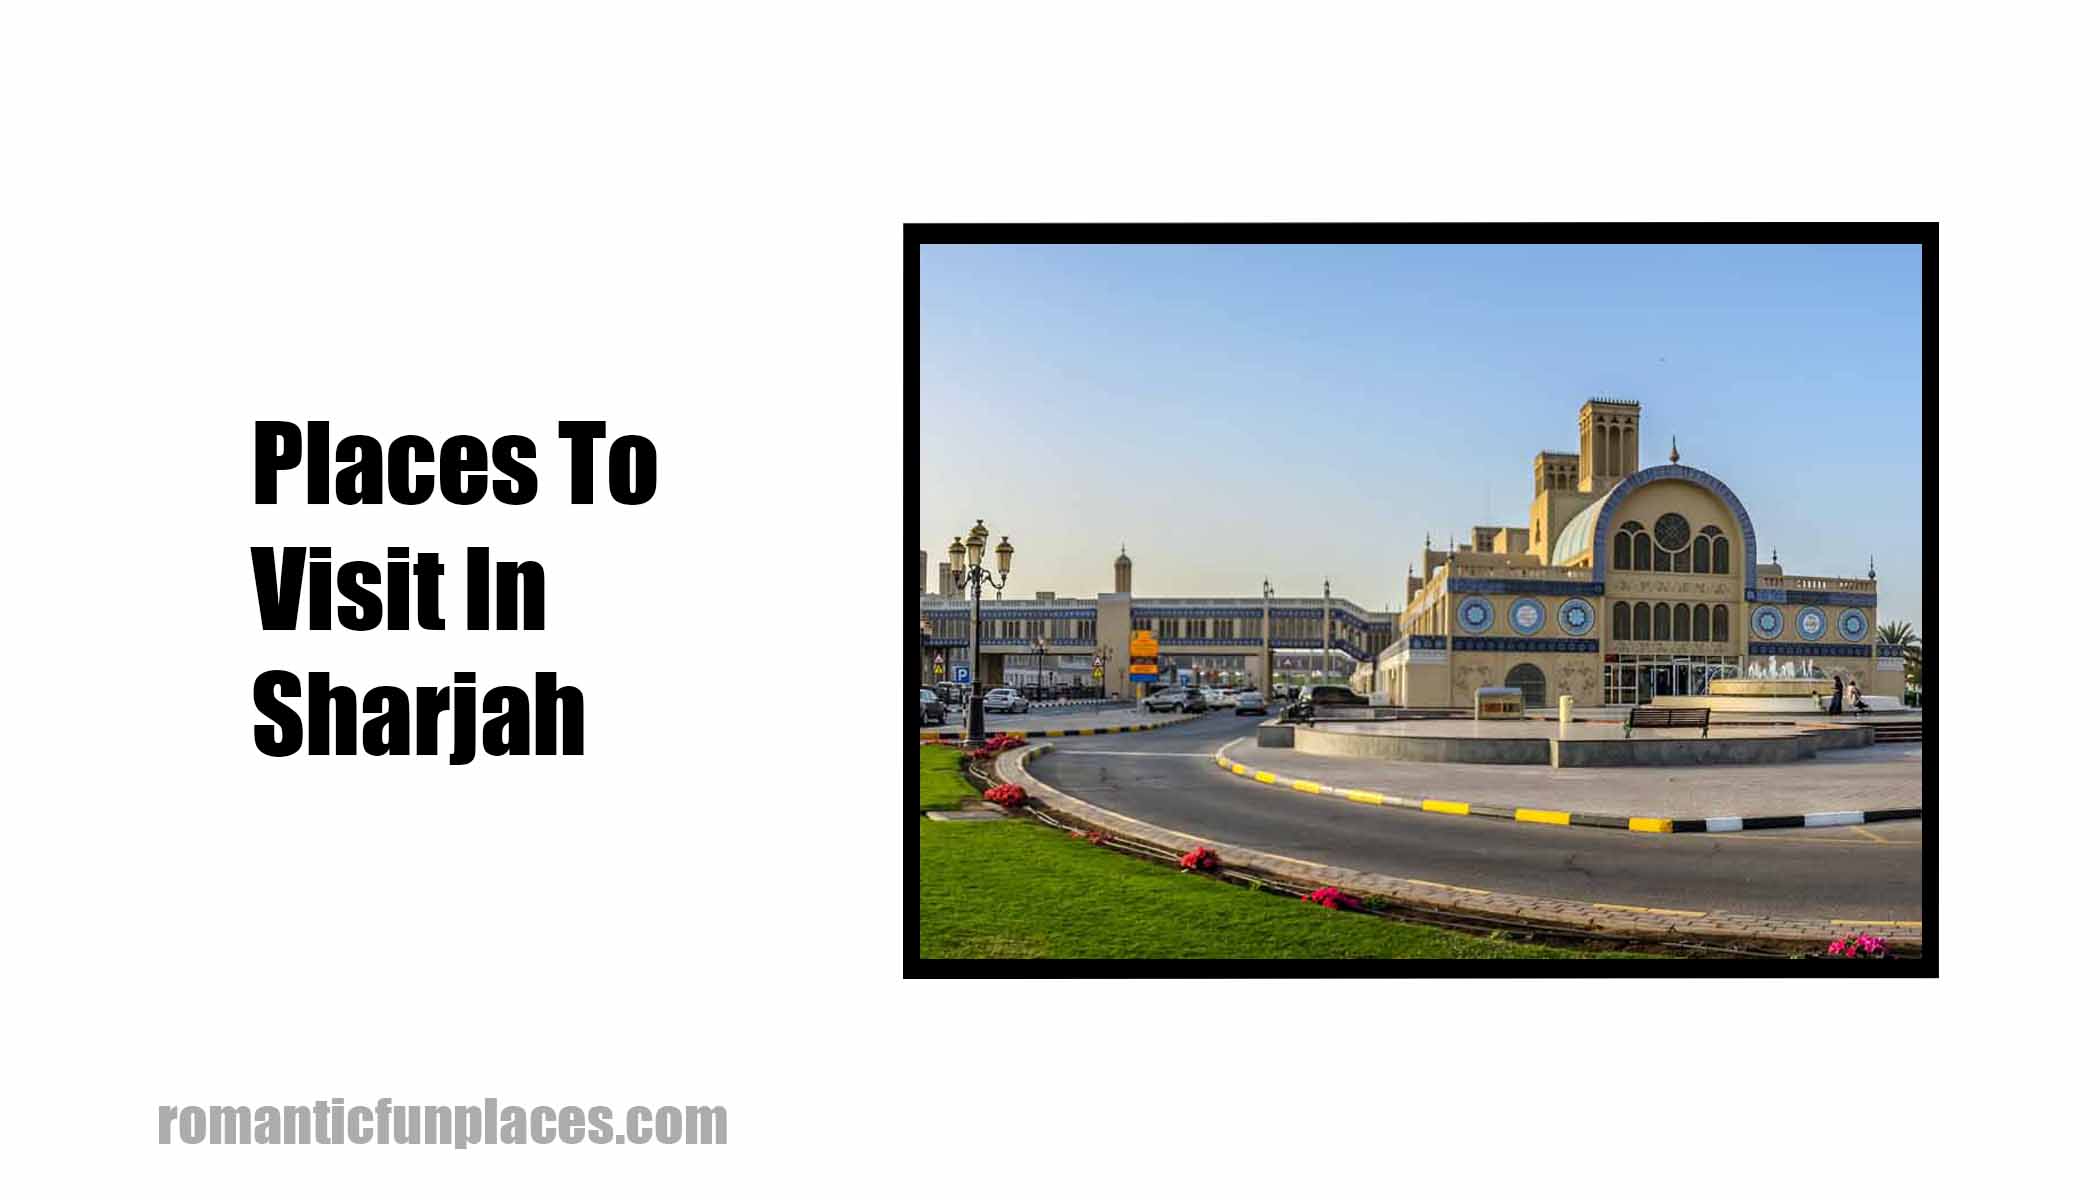 Places To Visit In Sharjah